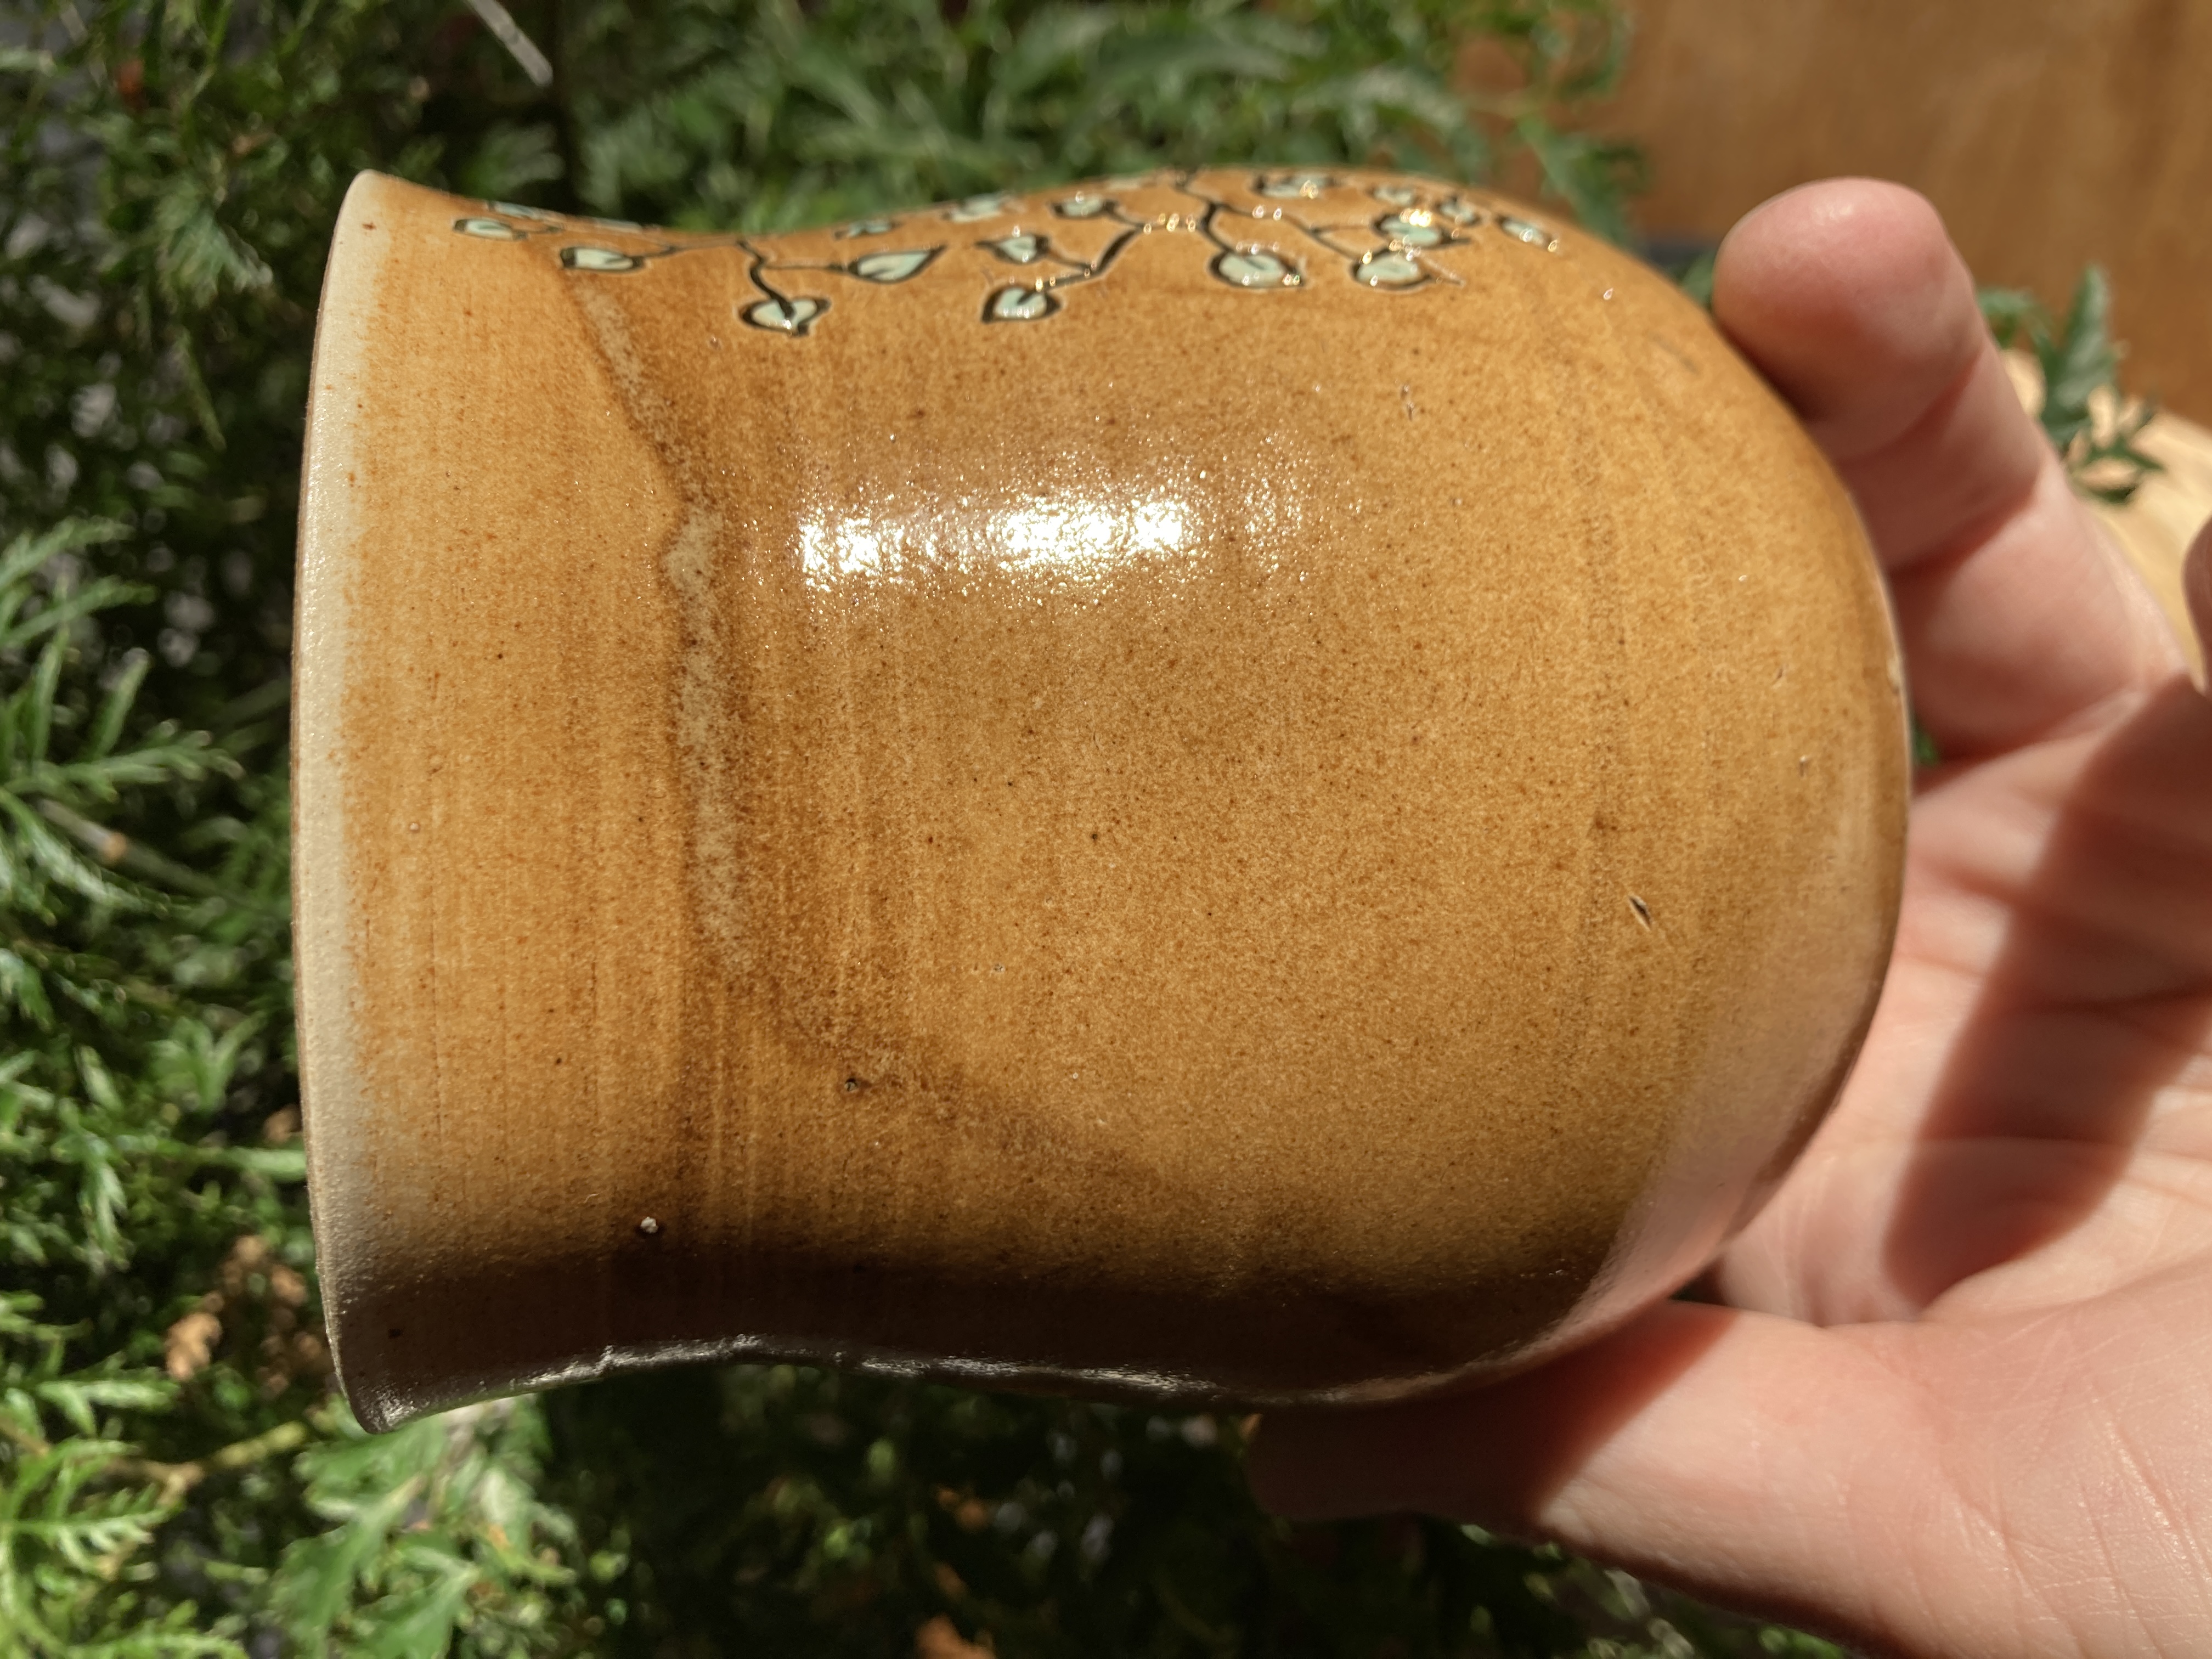 Tasse Lebensbaum mit Heilerde und Gold - Cup tree of life with healing clay and gold